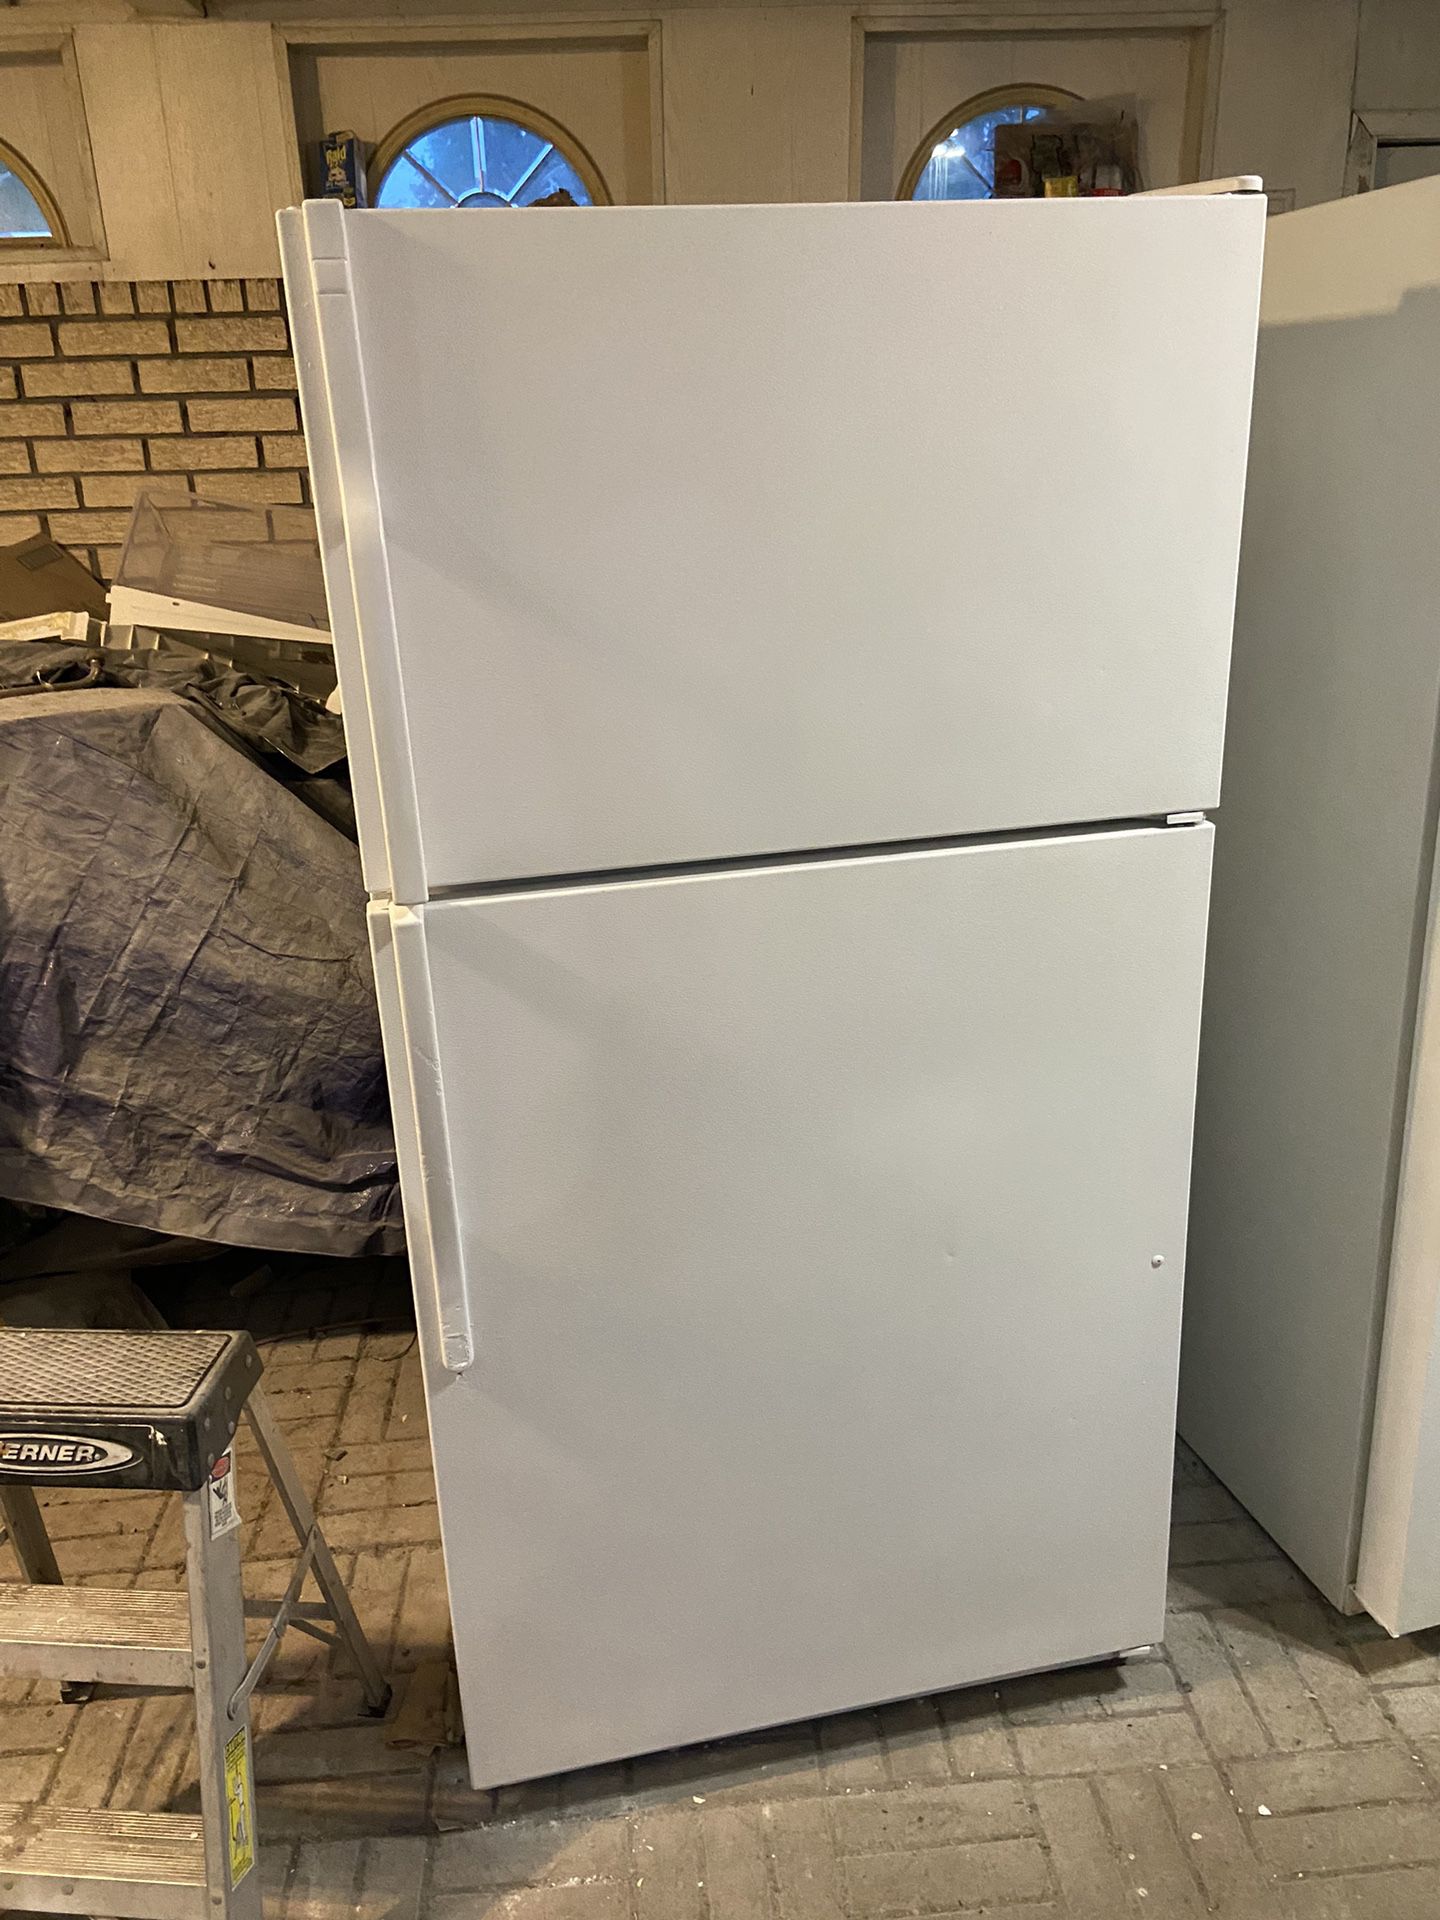 VERY LARGE 21 cu ft WHITE KENMORE FRIDGE,  RUNS FANTASTIC. IM IN MARRERO. TEXT ONLY!!!